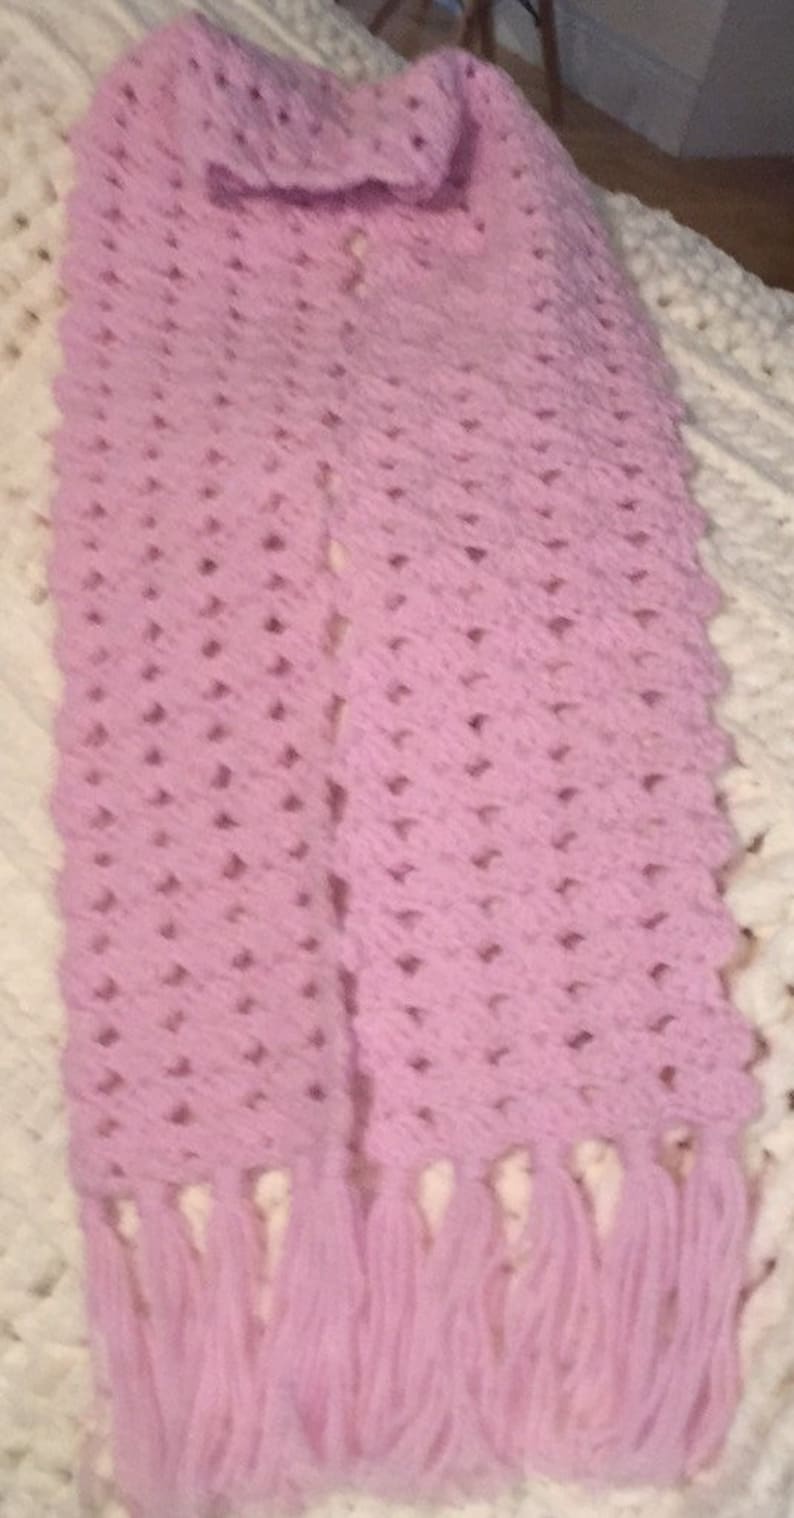 Hand Crocheted Neck Scarf 51 x 5 12 Excluding Fringe Pretty Pink Lovely Gift Shell Stitch Pattern Early Christmas Shopping